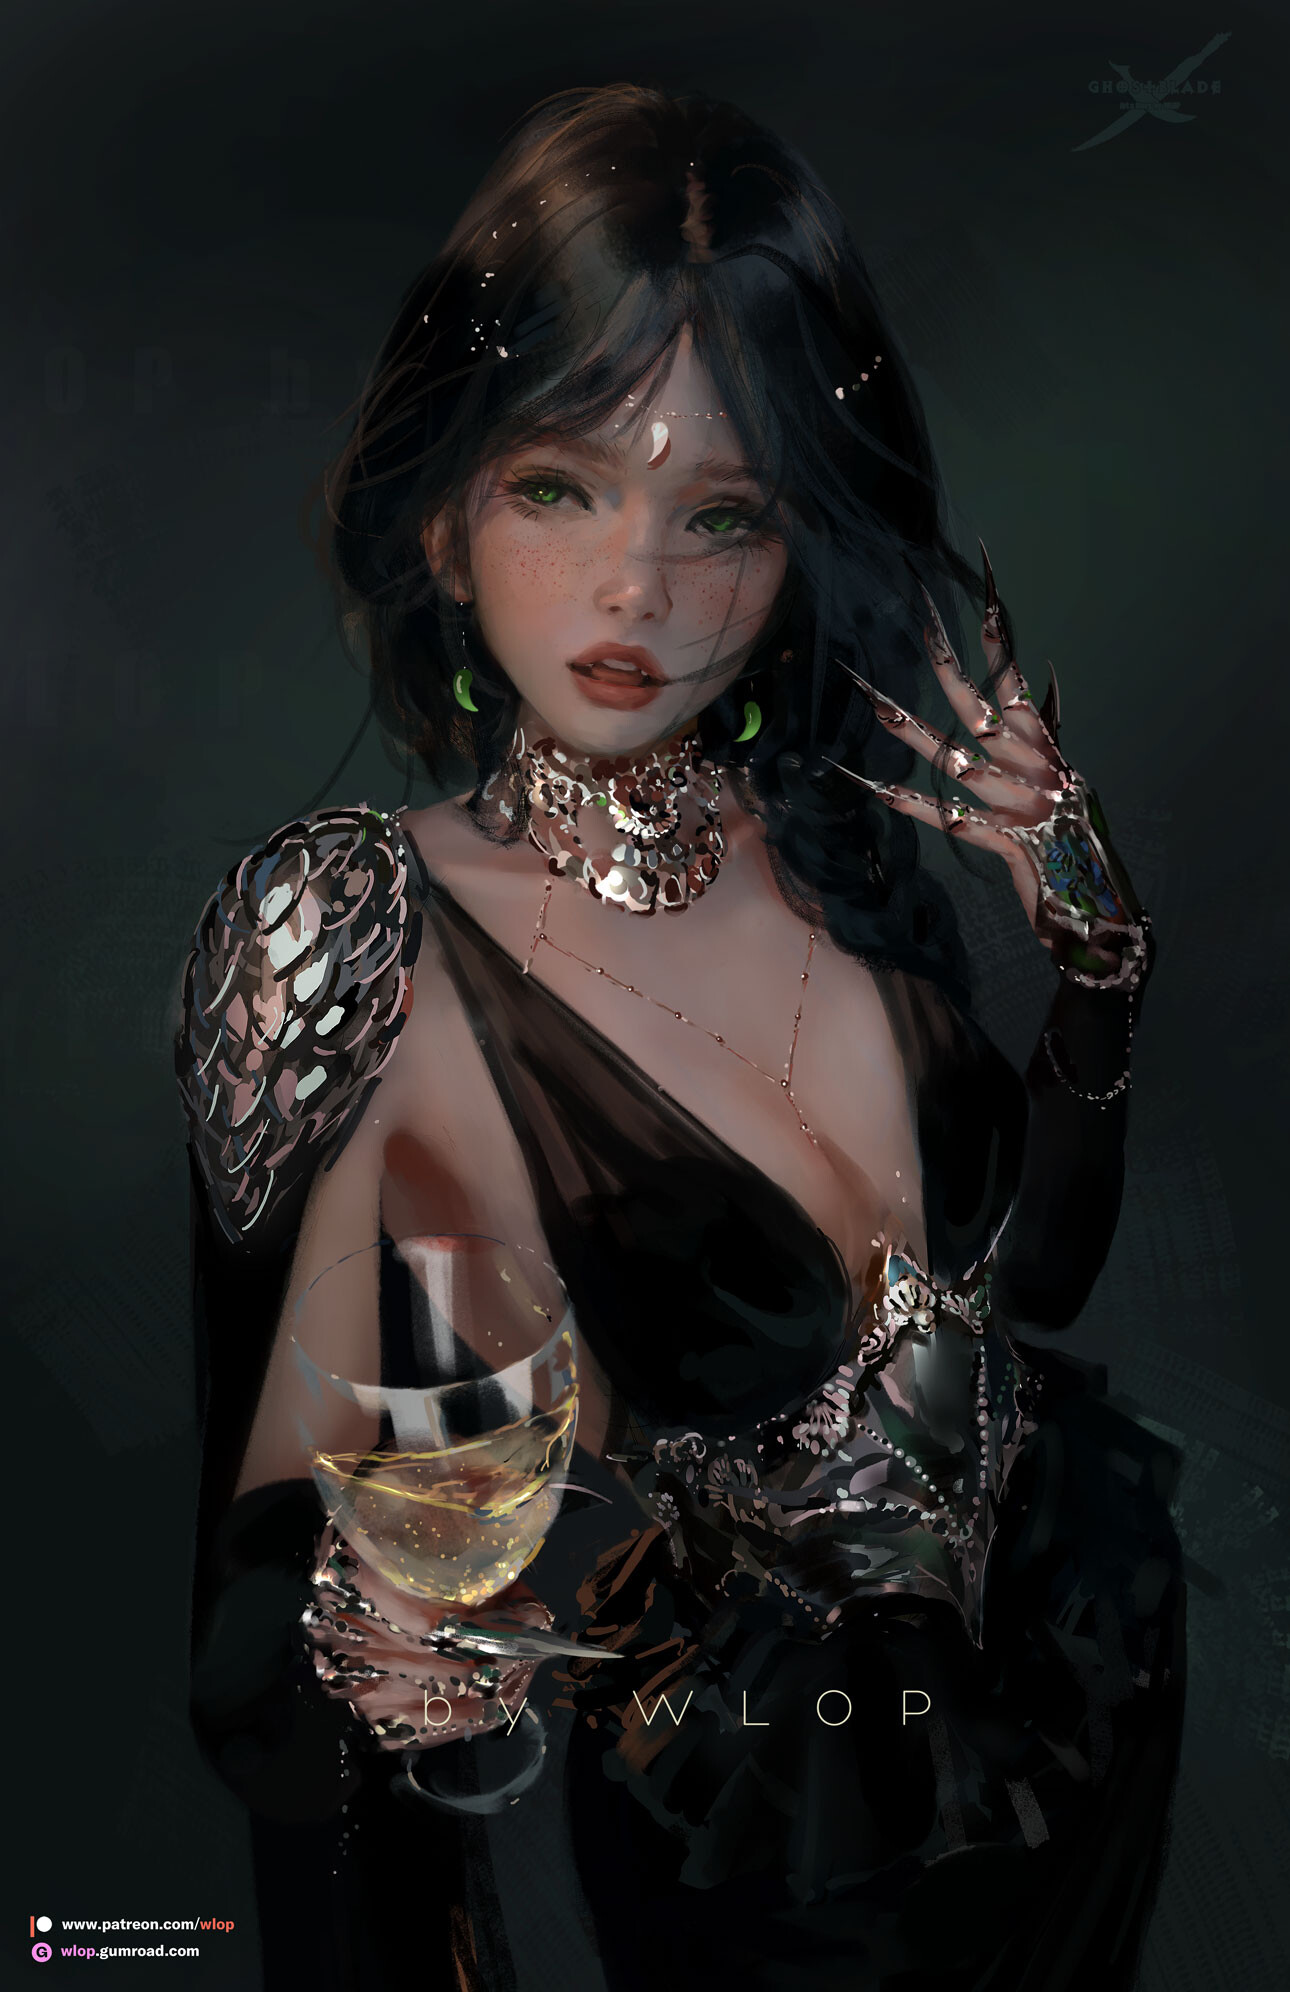 General 1290x1992 WLOP drawing women dark hair green eyes dress black clothing champagne jewelry simple background portrait display cleavage wine glass